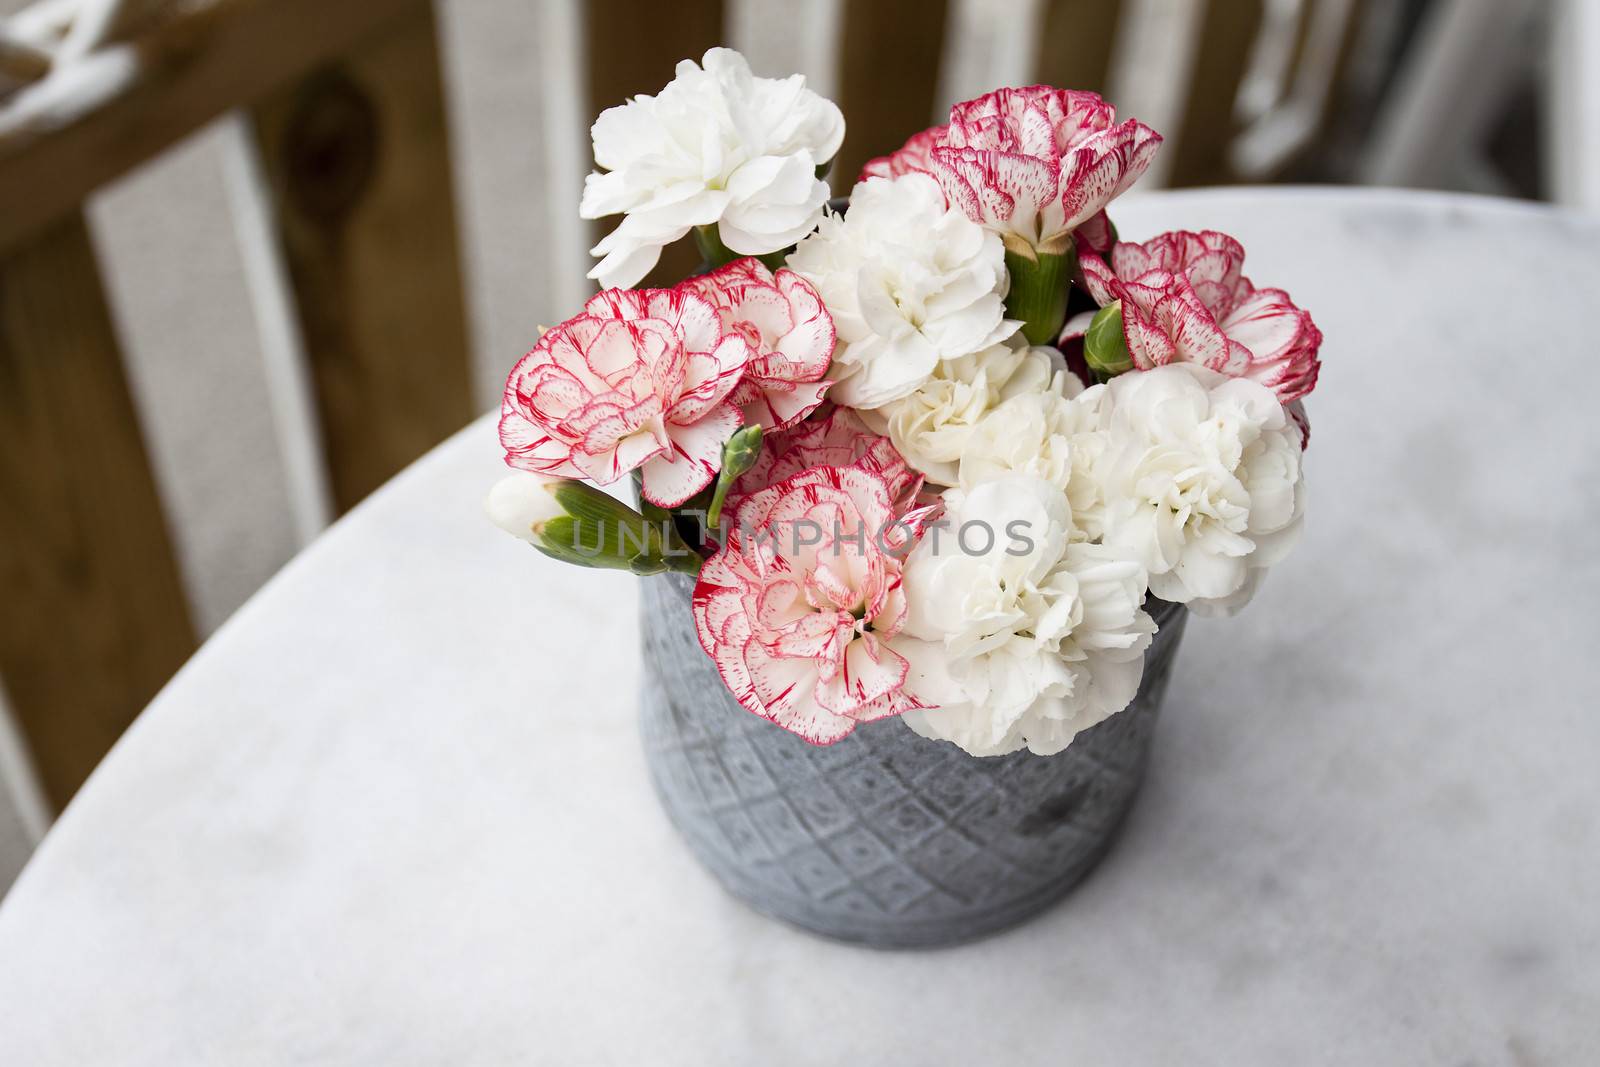 A small bunch of flowers in a vase on a table